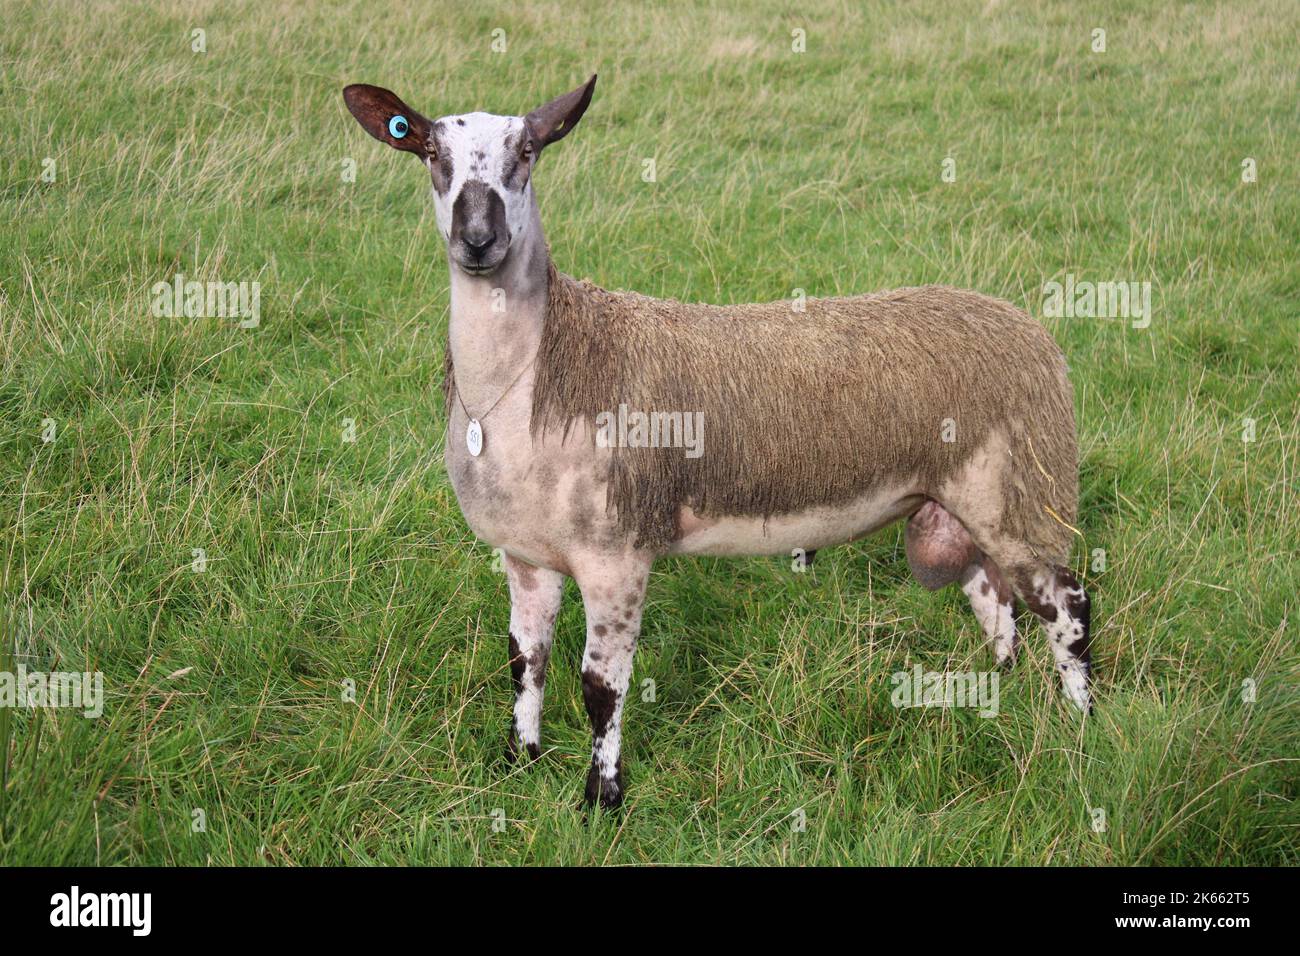 A Bluefaced Leicester sheep in a meadow Stock Photo